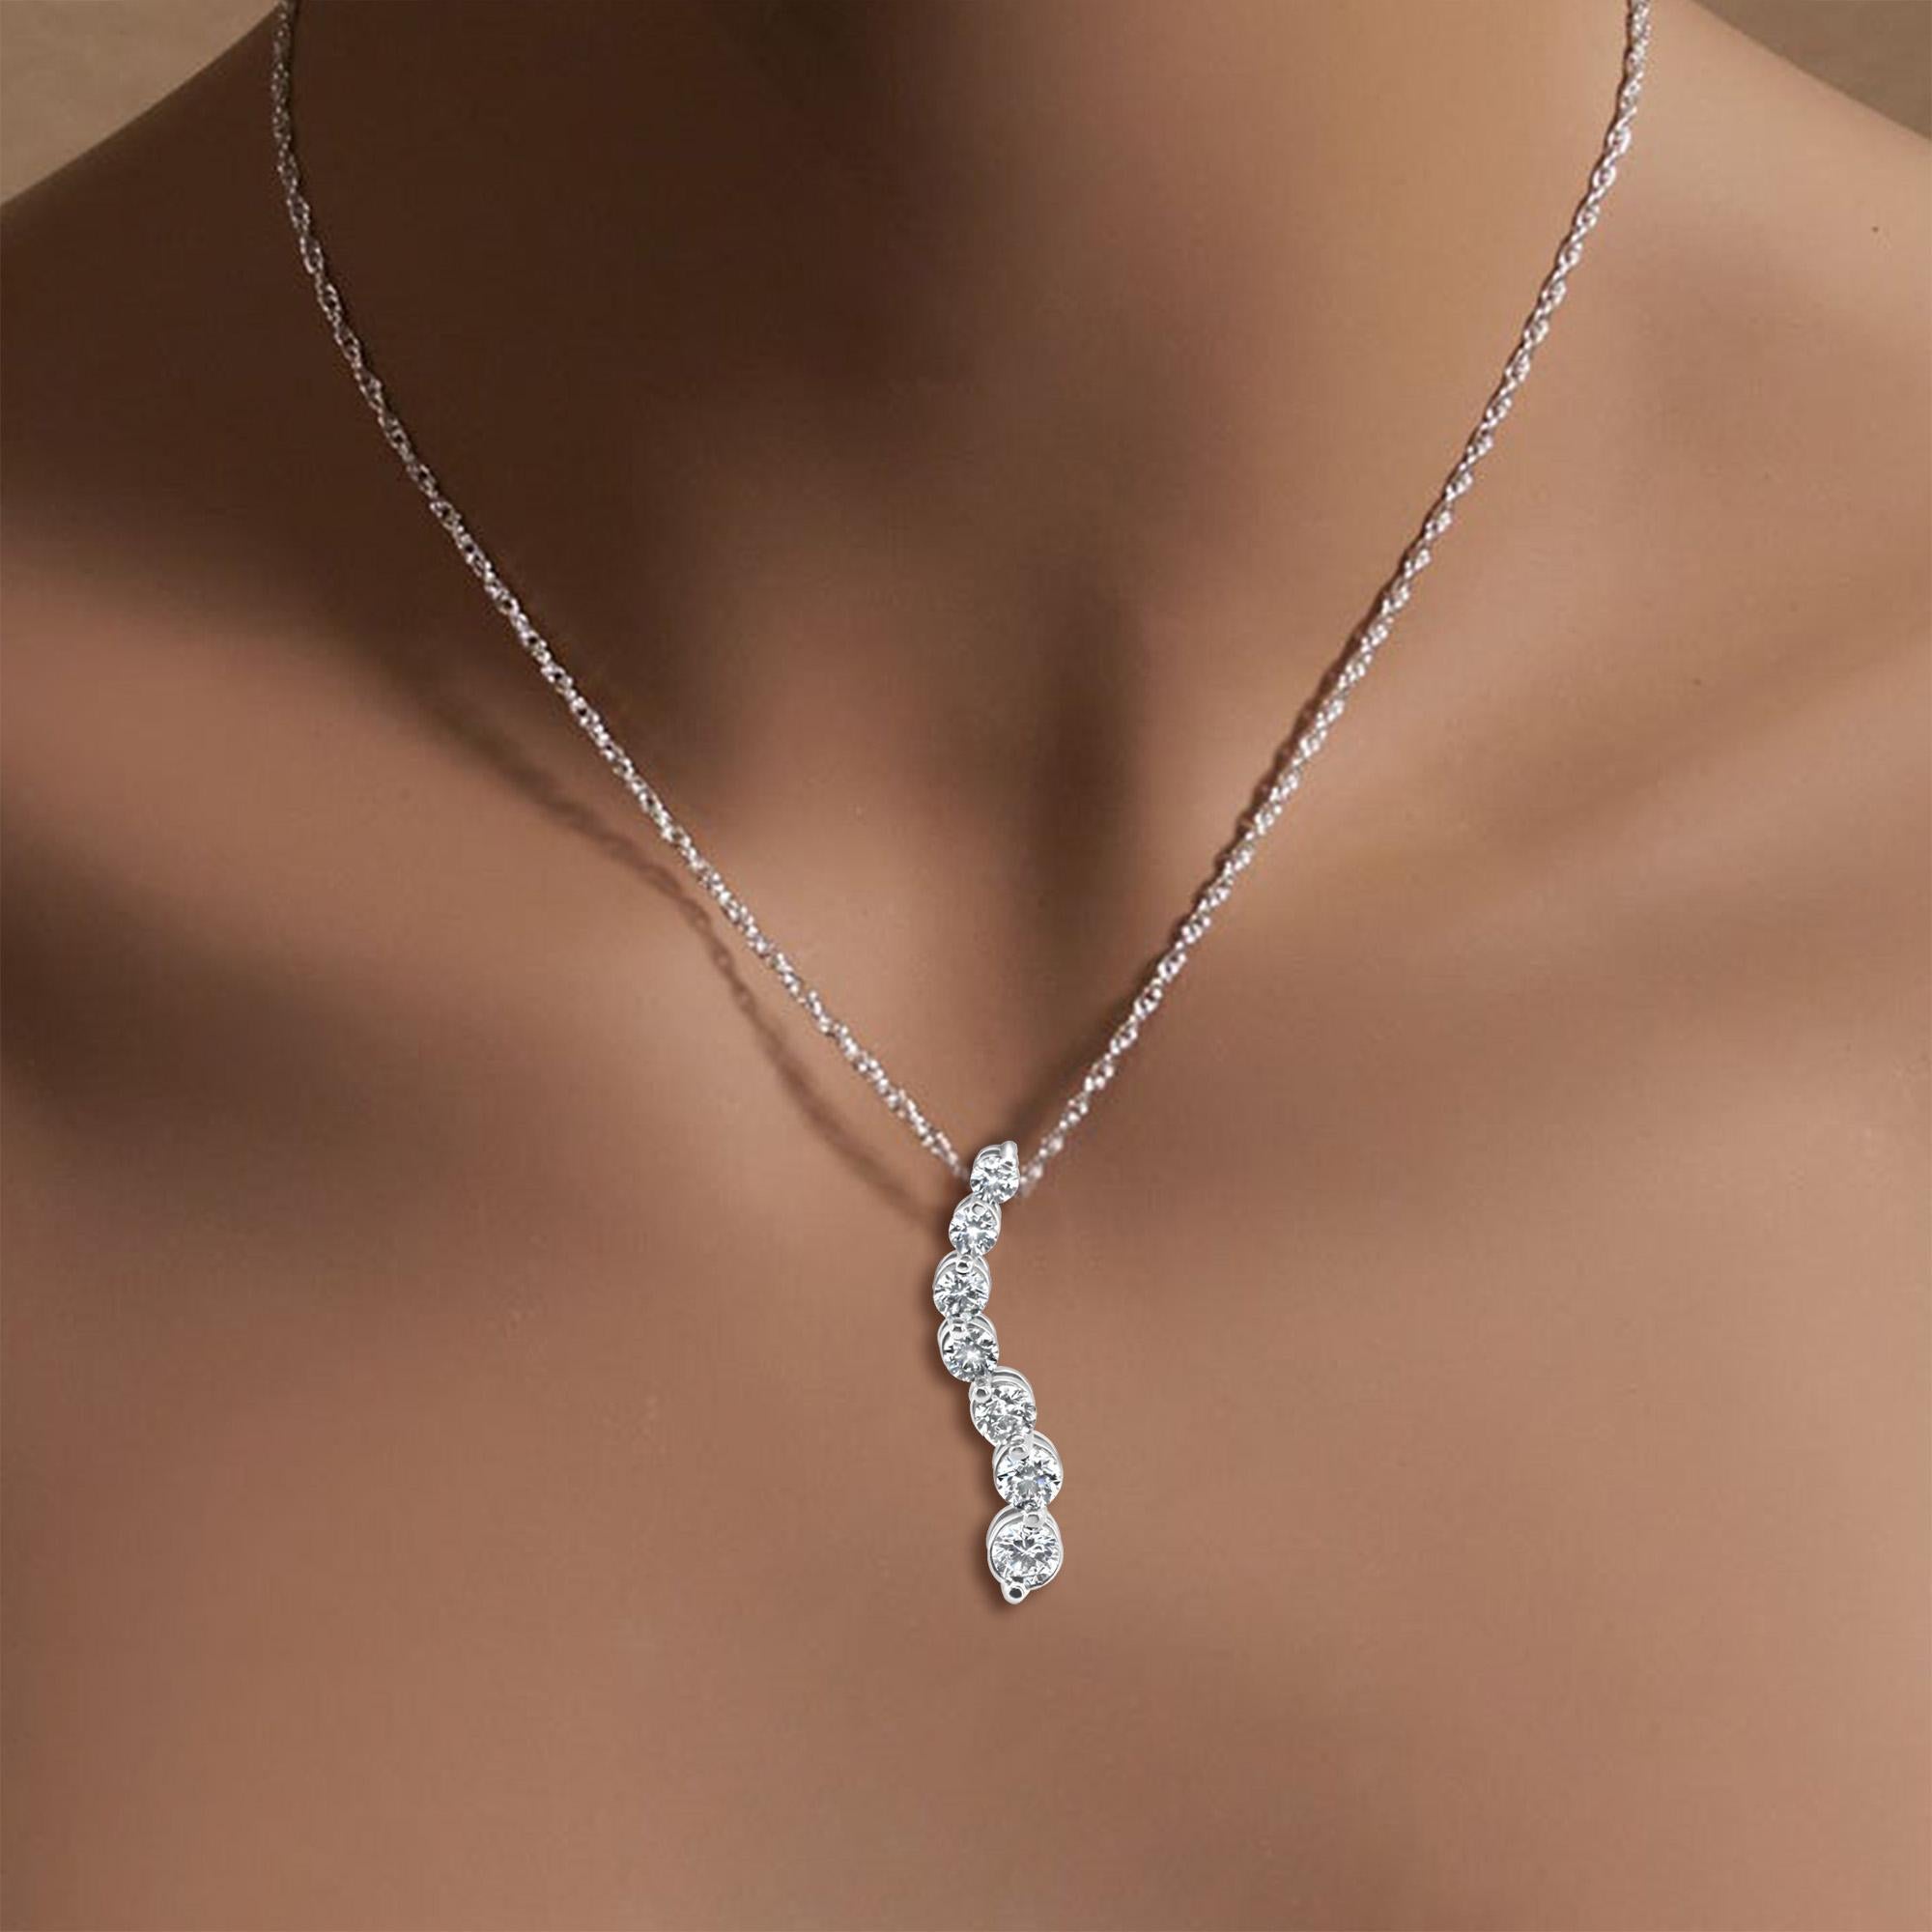 ♥ Product Summary ♥

Main Stone: Diamonds
Approx. Carat Weight: 1.53cttw
Diamond Cut: Round
Number of Stones: 7
Metal Choice: 14K White Gold
Dimensions: 30mm x 5mm 
Weight: 2 grams
Chain: 16